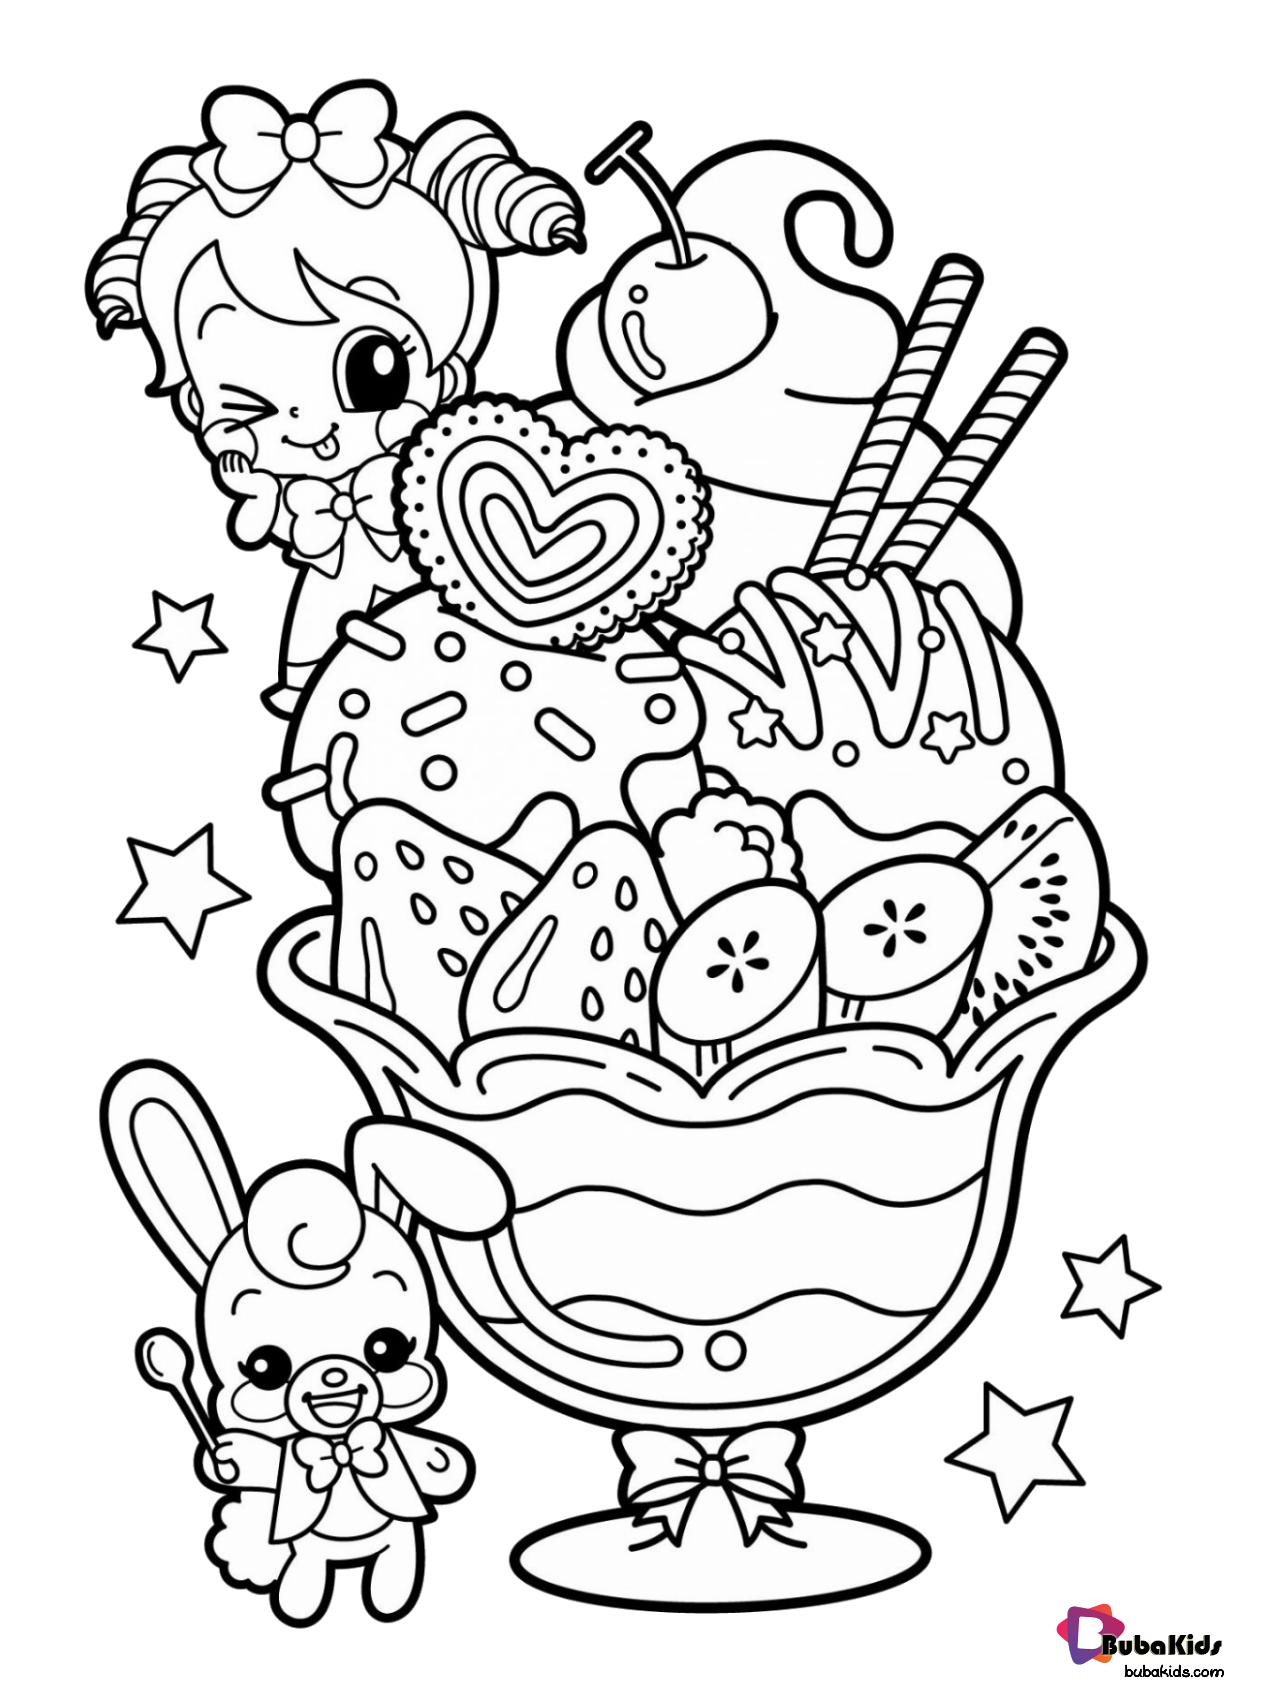 Food coloring page for kids Wallpaper